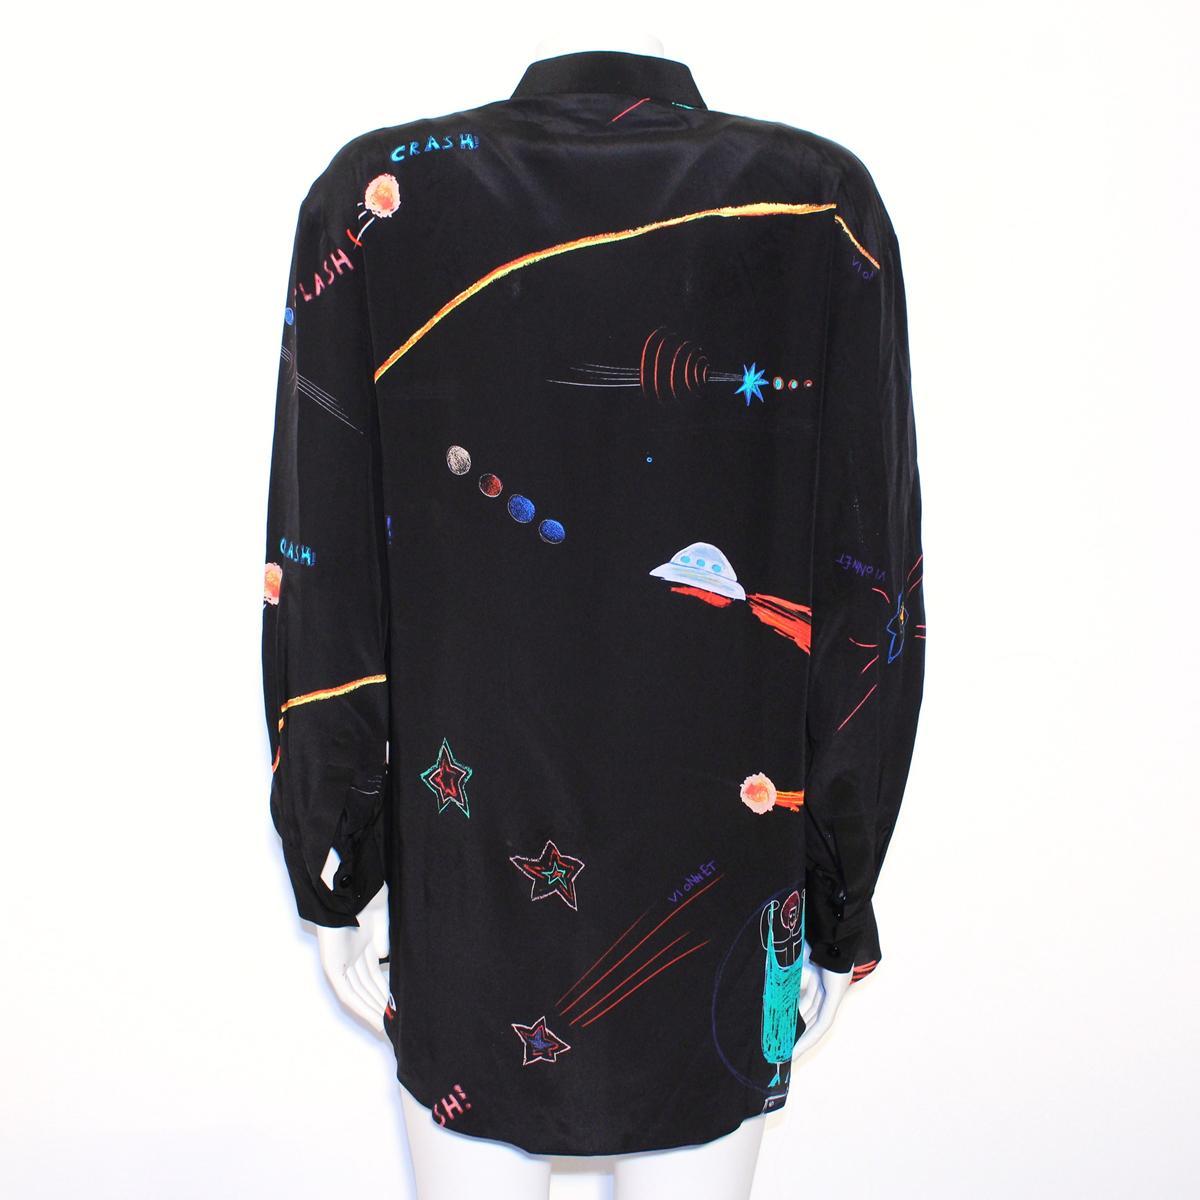 Super chic Vionnet Paris shirt
Silk
Black color
Multicolored satellites print
Lenght from shoulder cm 60 on front (23.6 inches) and cm 70 (27.5 inches) on back 
Worldwide express shipping included in the price !